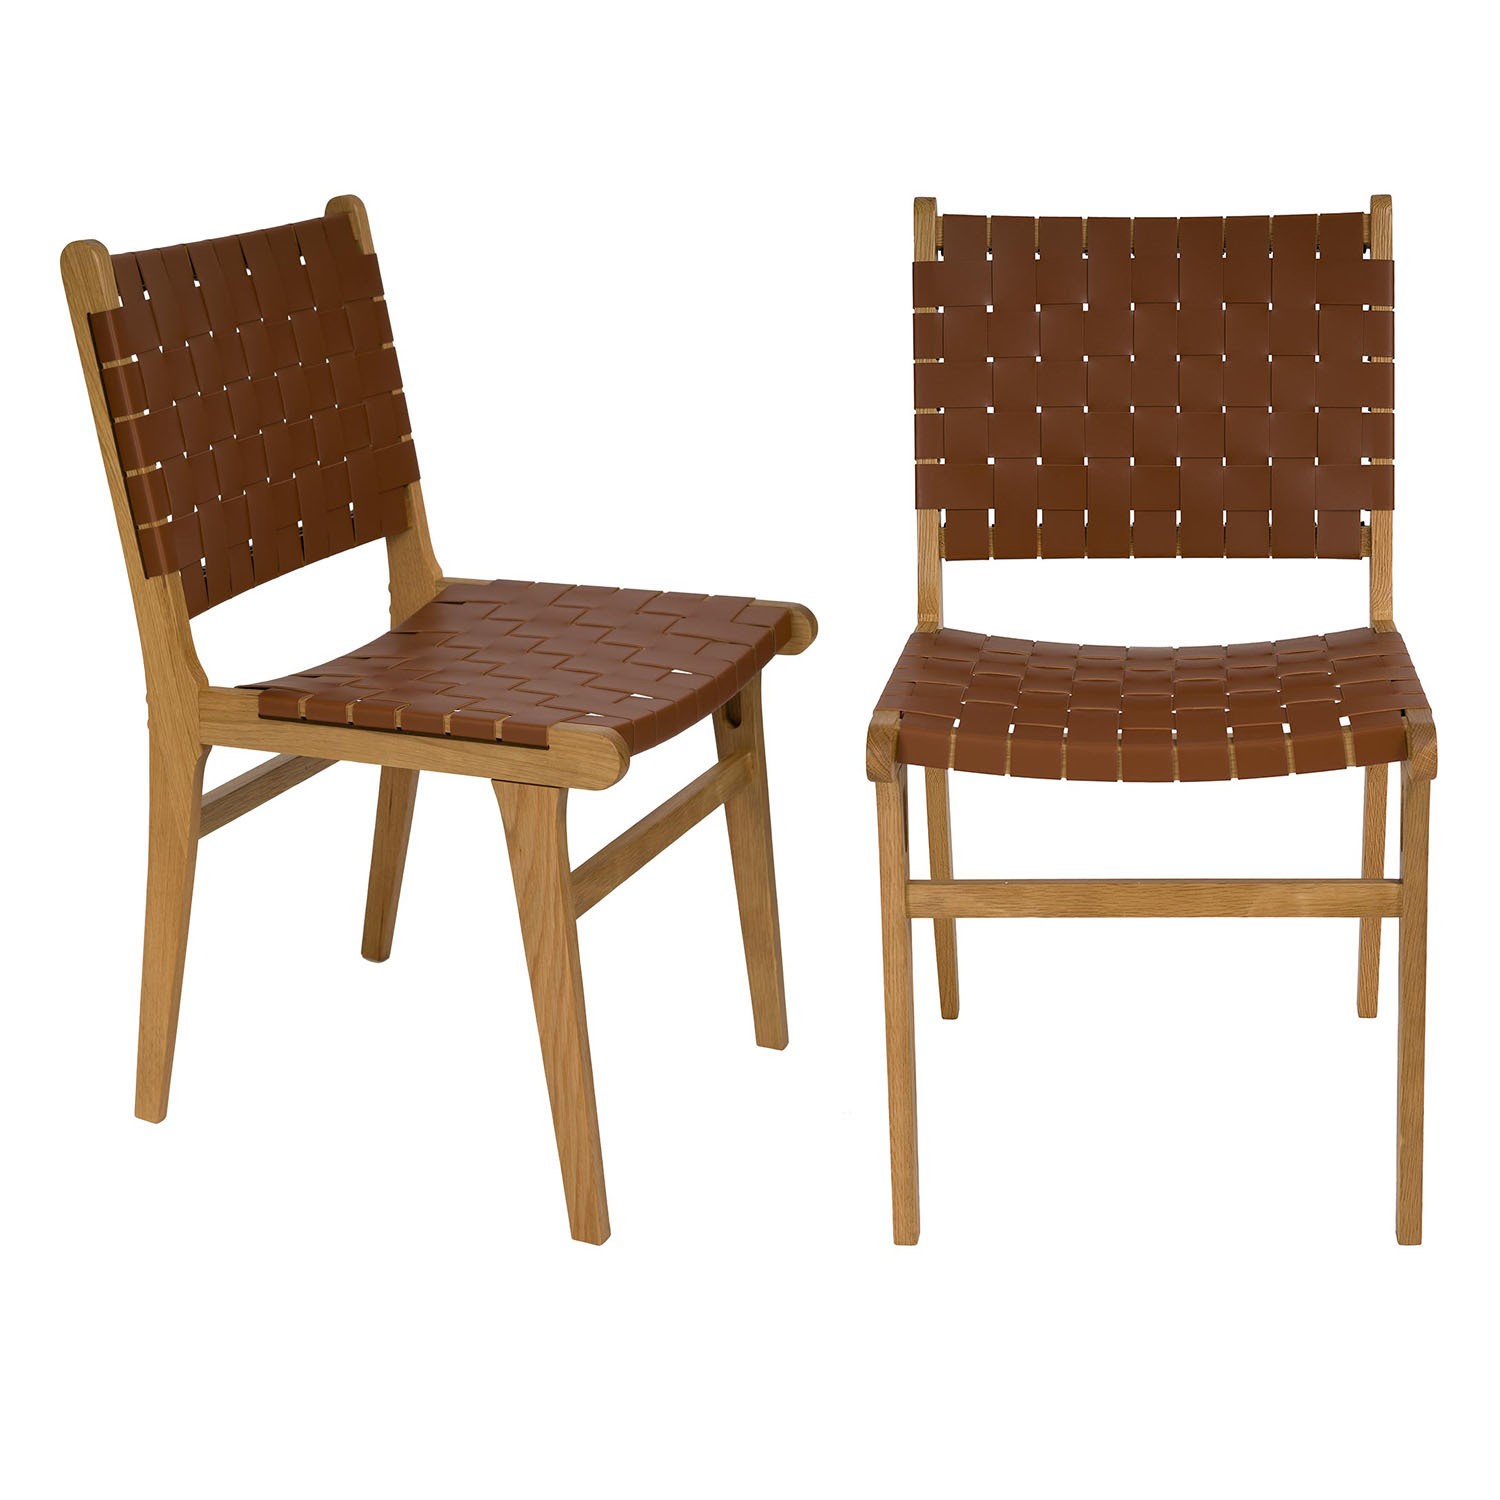 Photo of Set of 2 tan faux leather woven dining chairs - bree